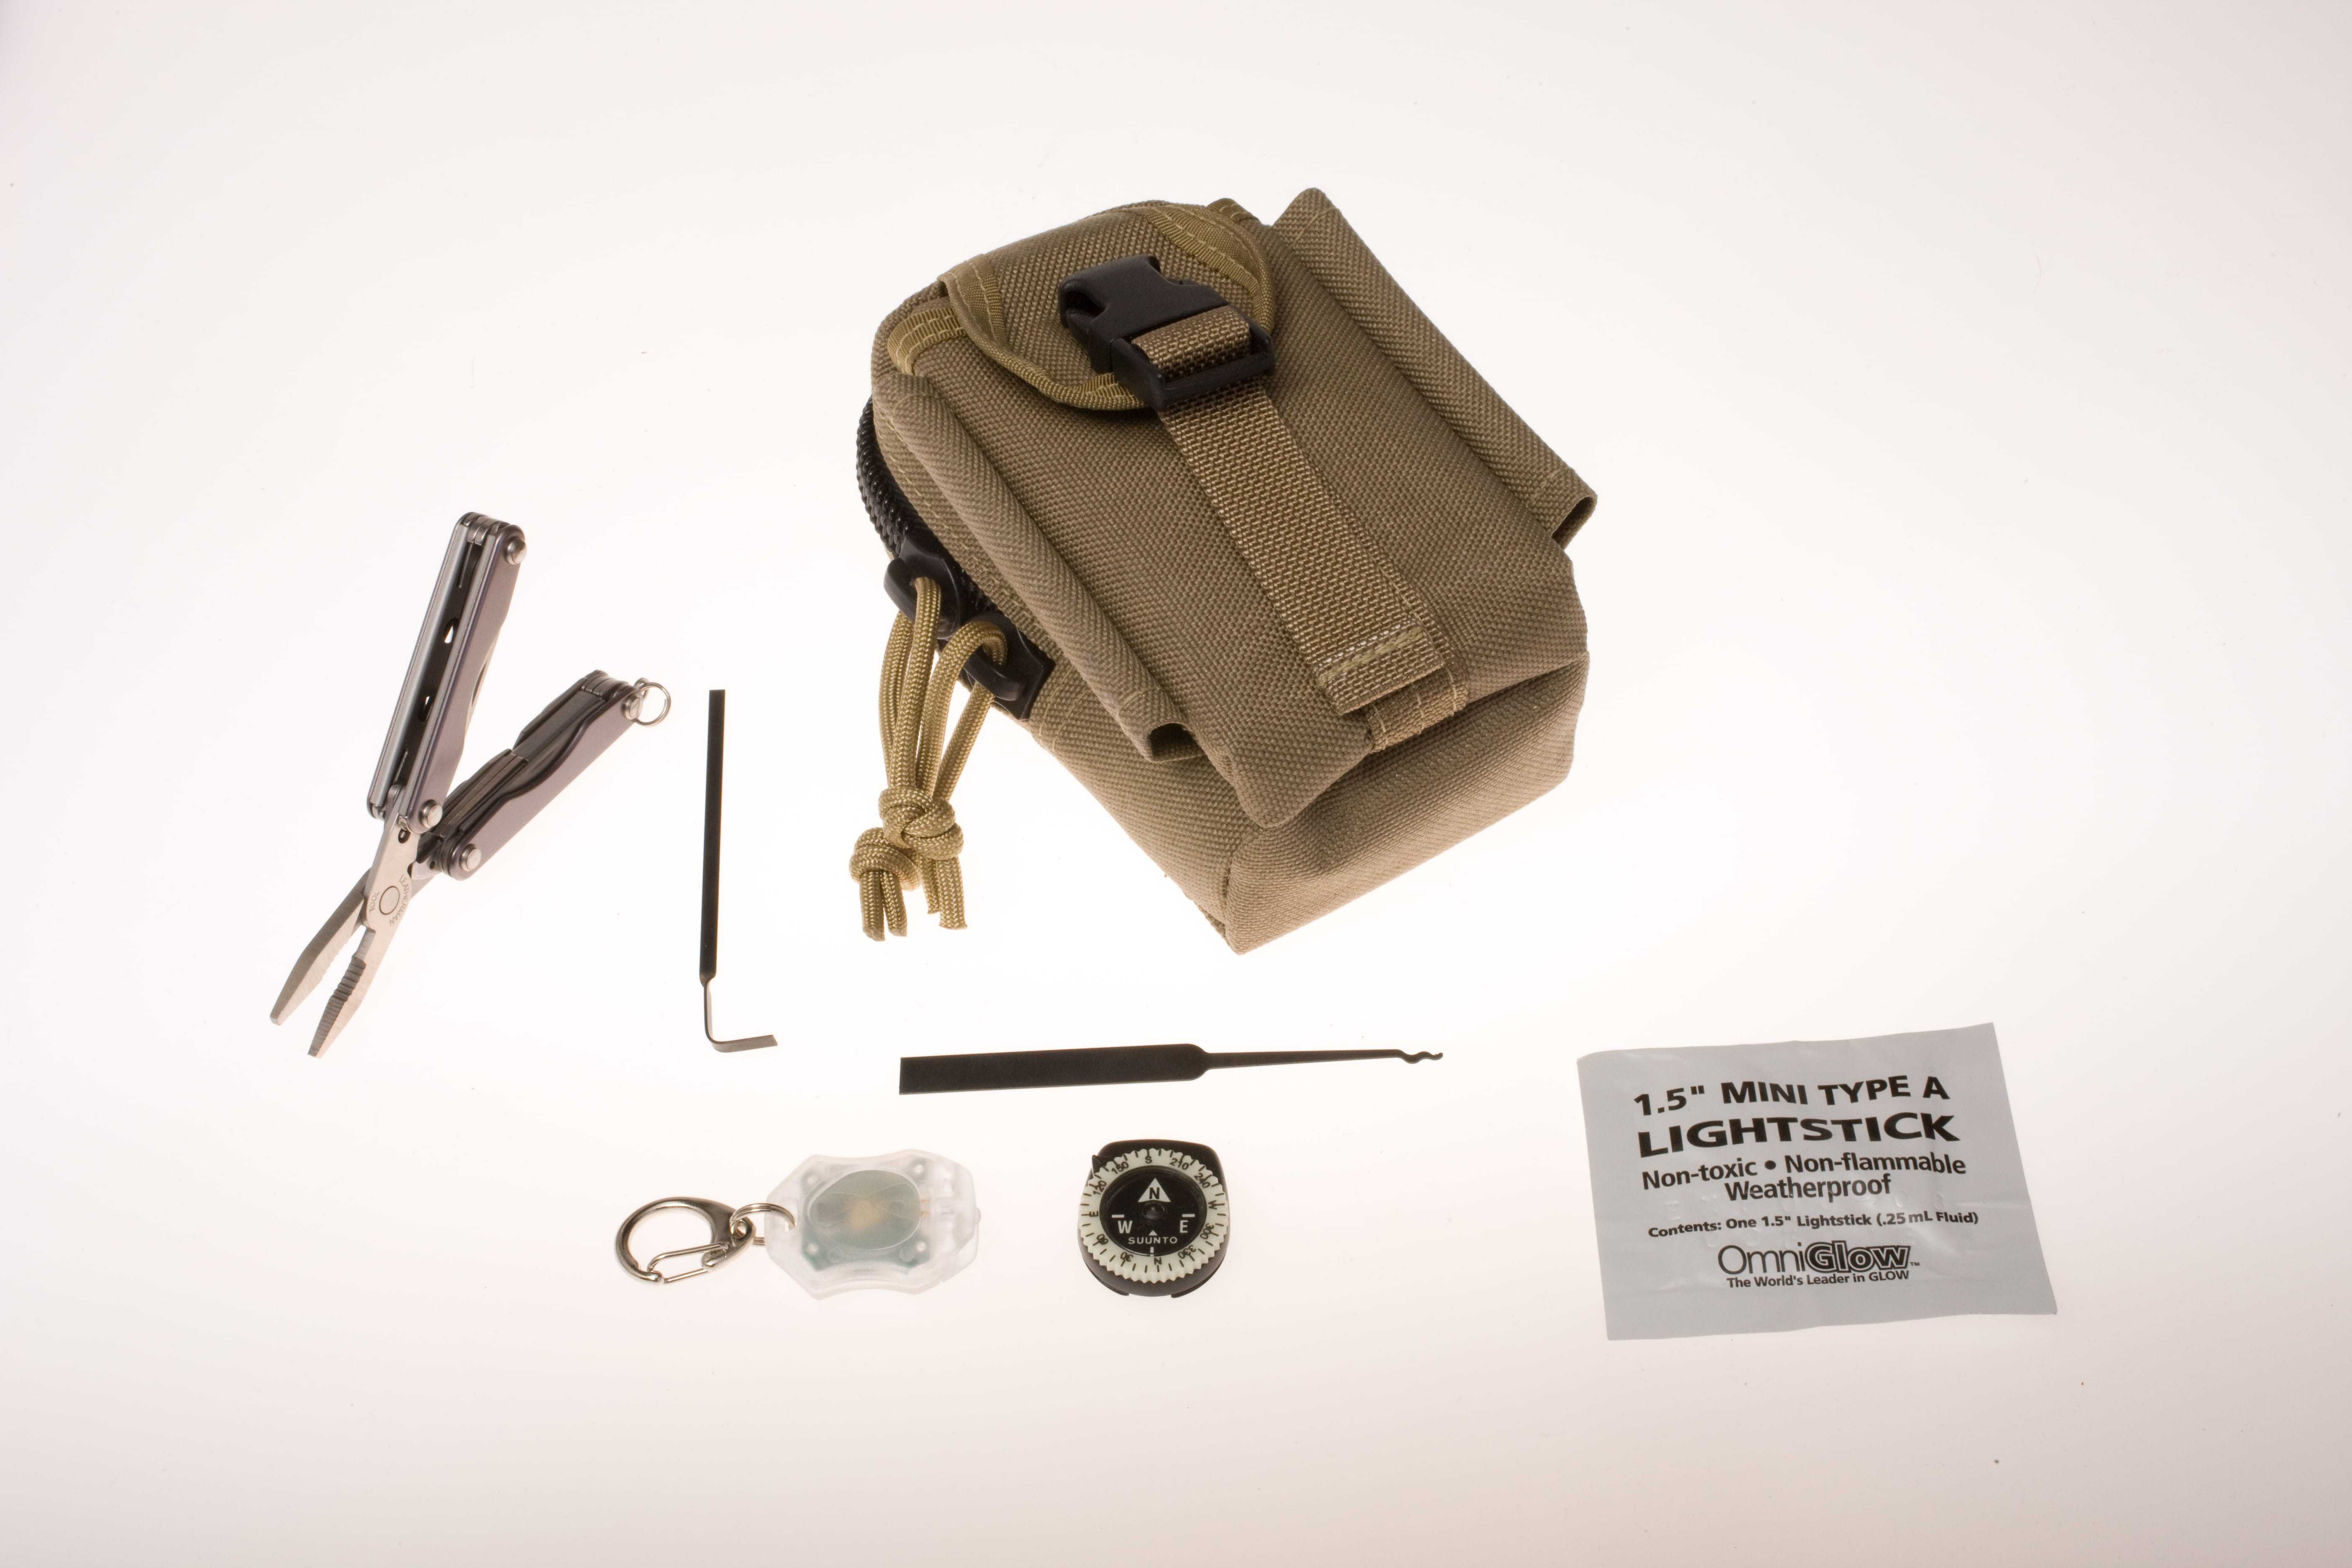 A small bag surrounded by wire cutters, a light stick, and other small survival tools